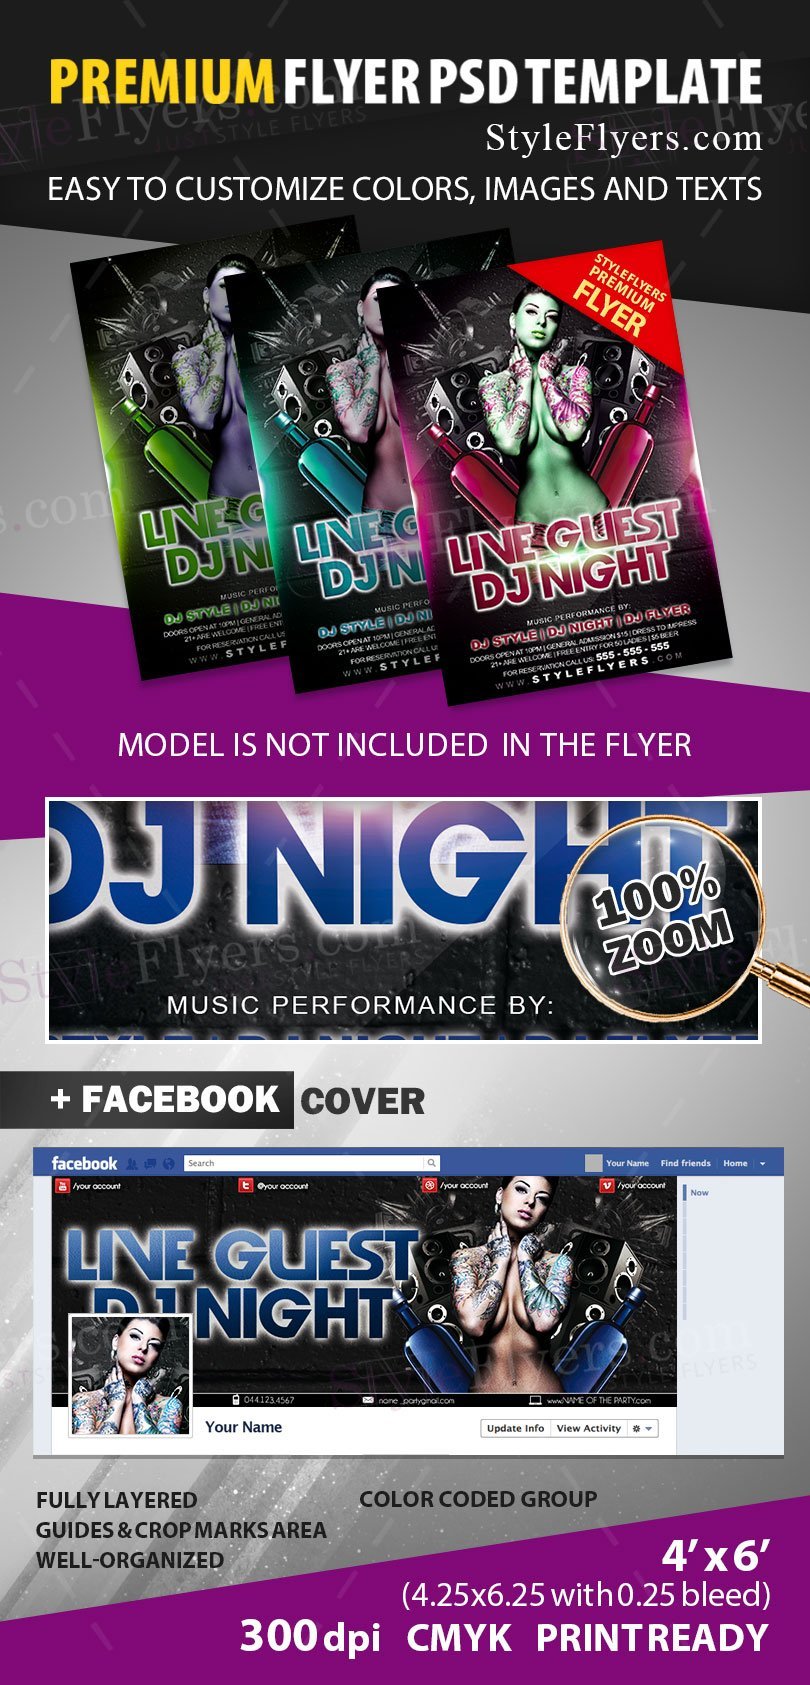 preview_live_guest_dj_night-1_psd_flyer_template